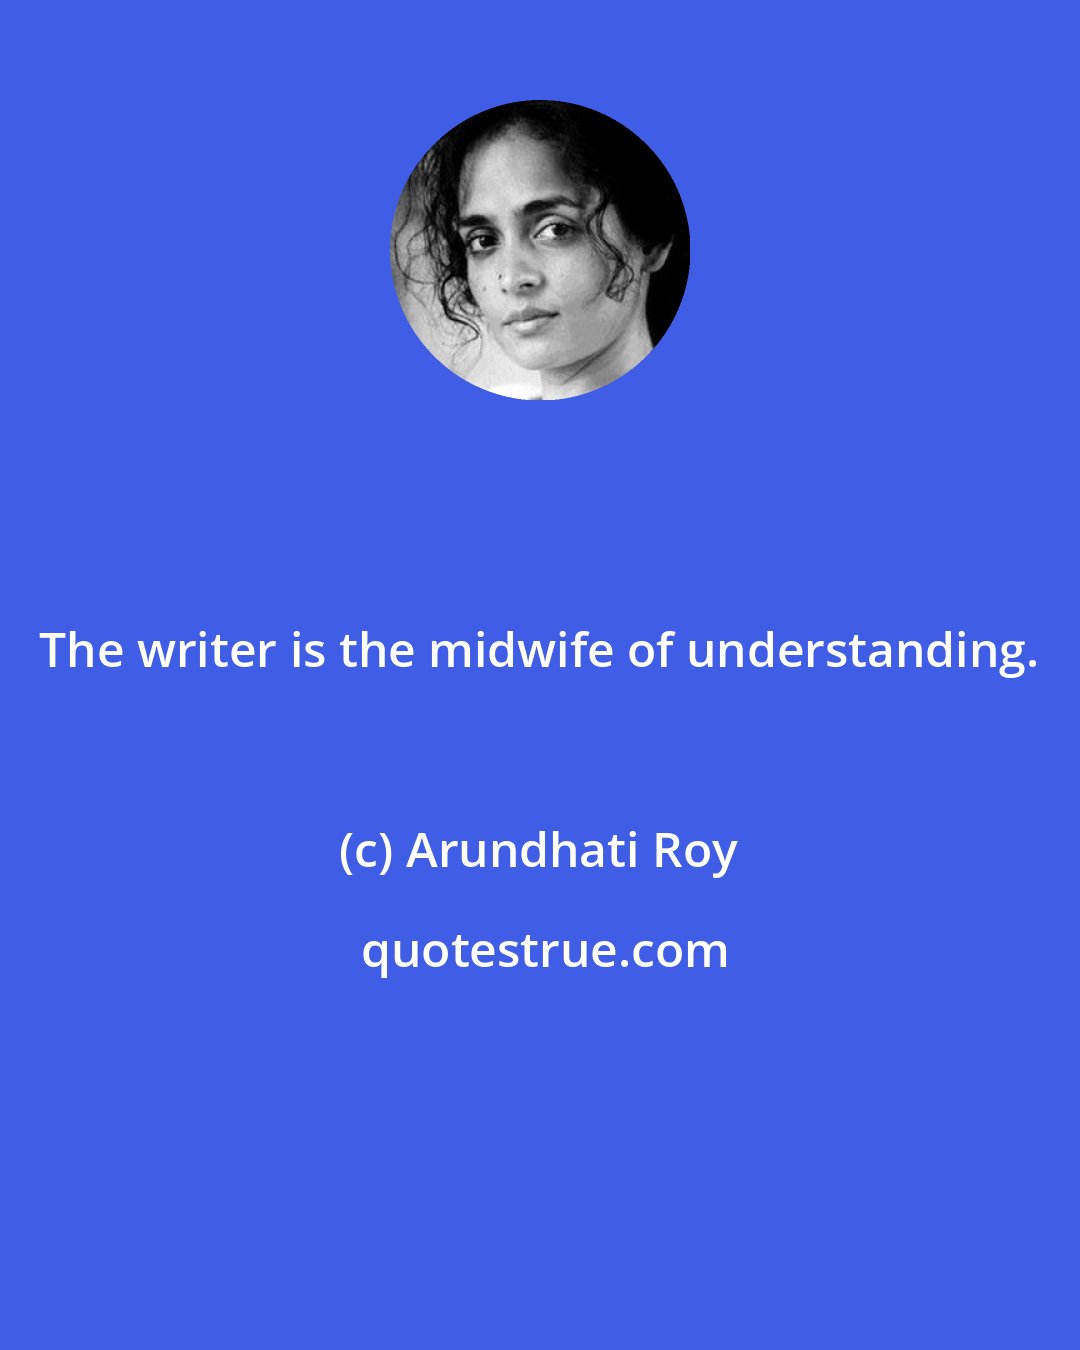 Arundhati Roy: The writer is the midwife of understanding.